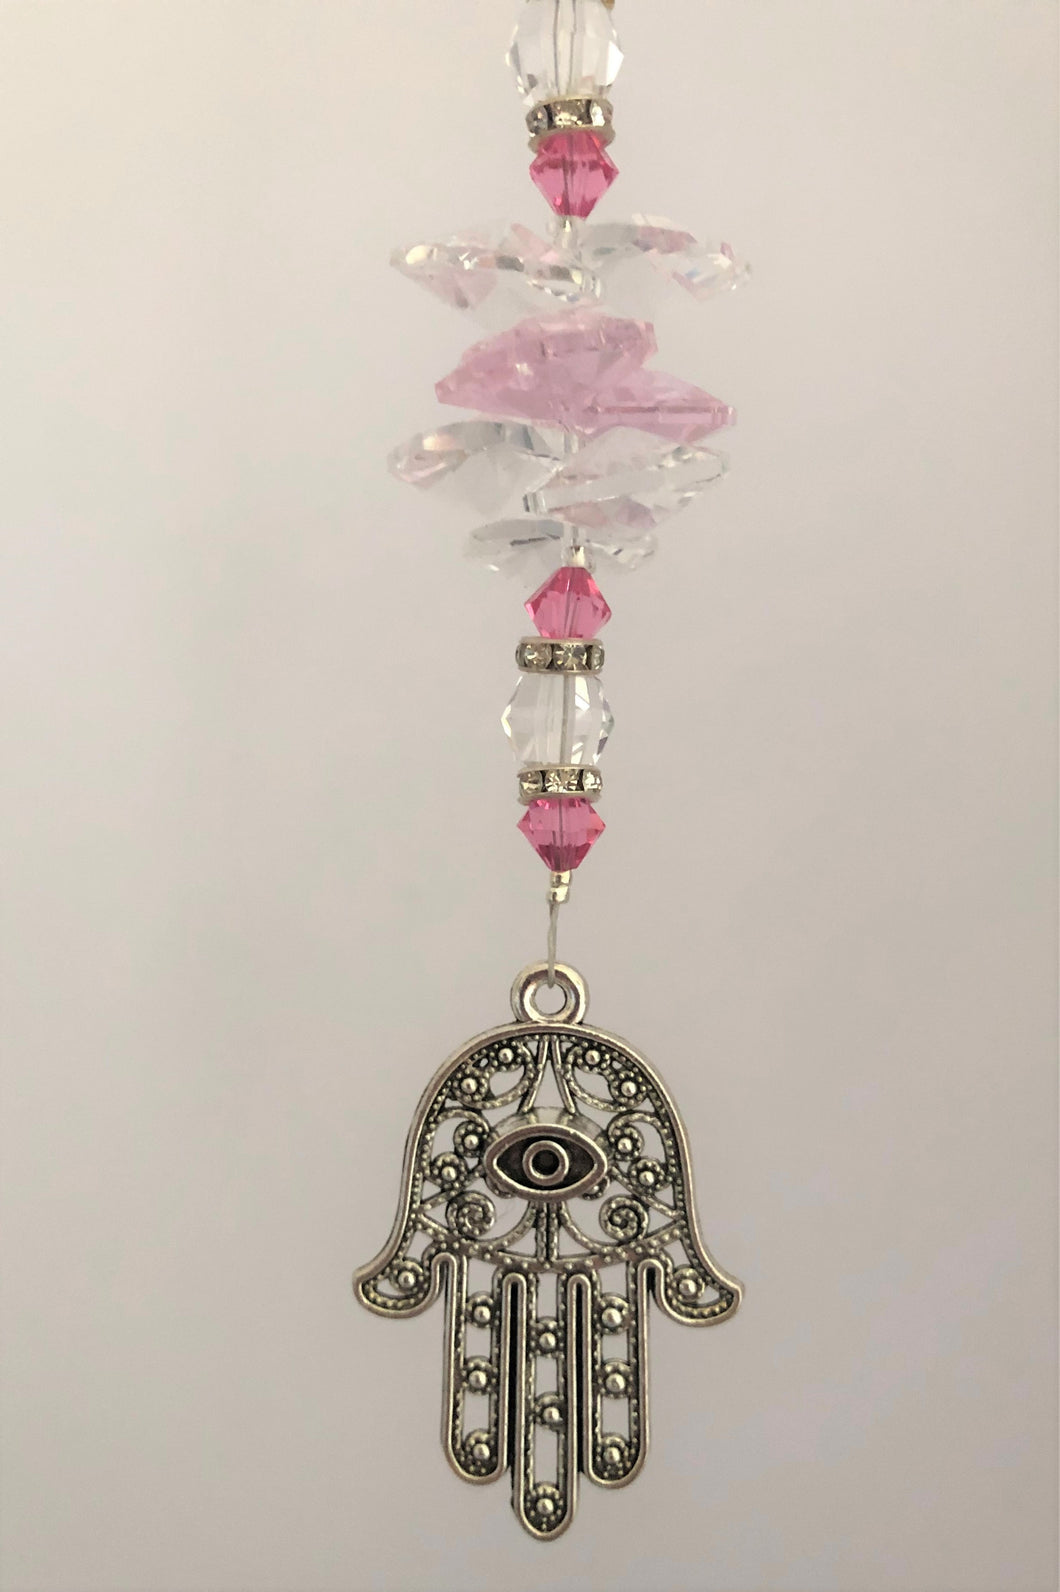 This beautiful Hand of Fatima suncatcher which is decorated with crystals and Rose Quartz